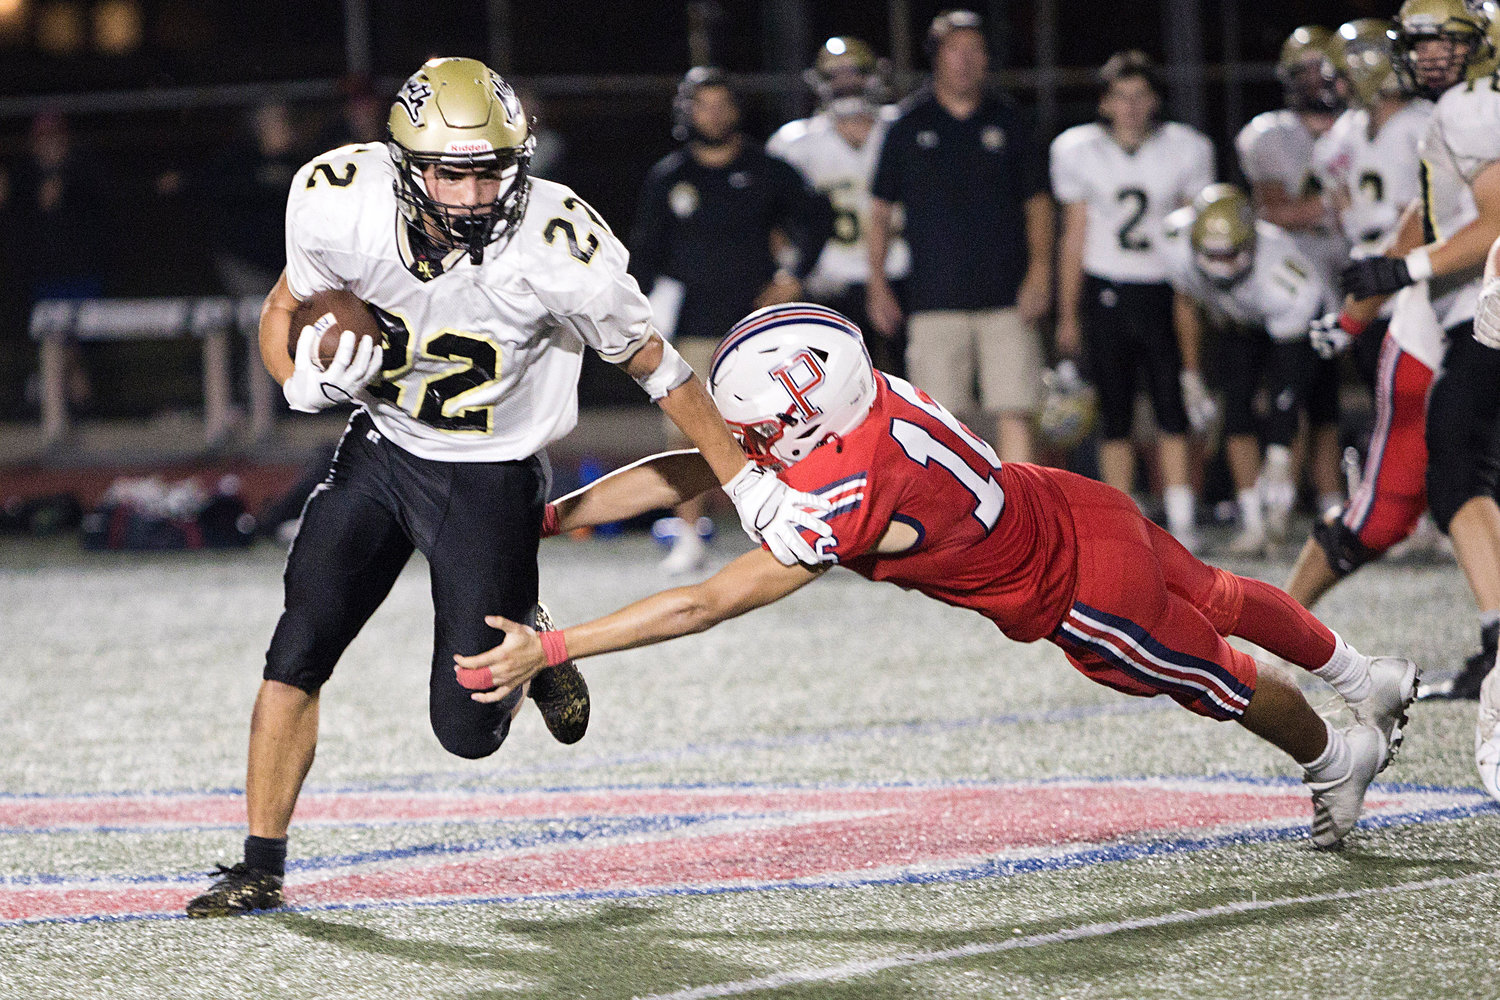 George Smith extends himself toward a North Kingstown runningback.